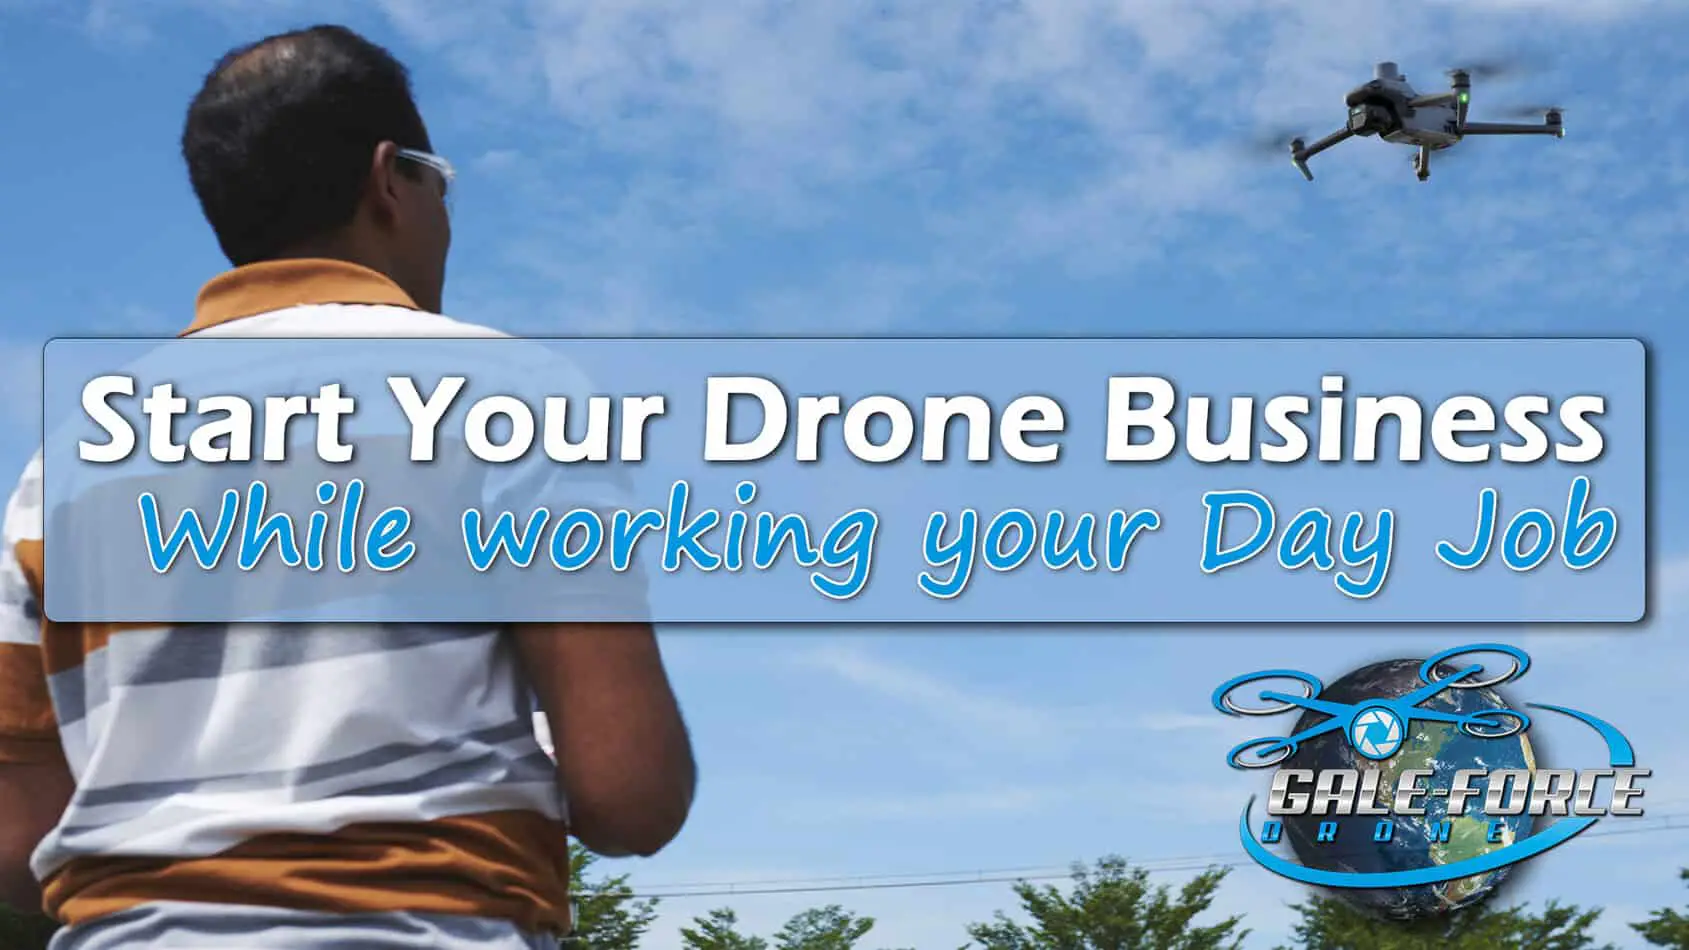 Start Your Drone Business While Working Your Day Job